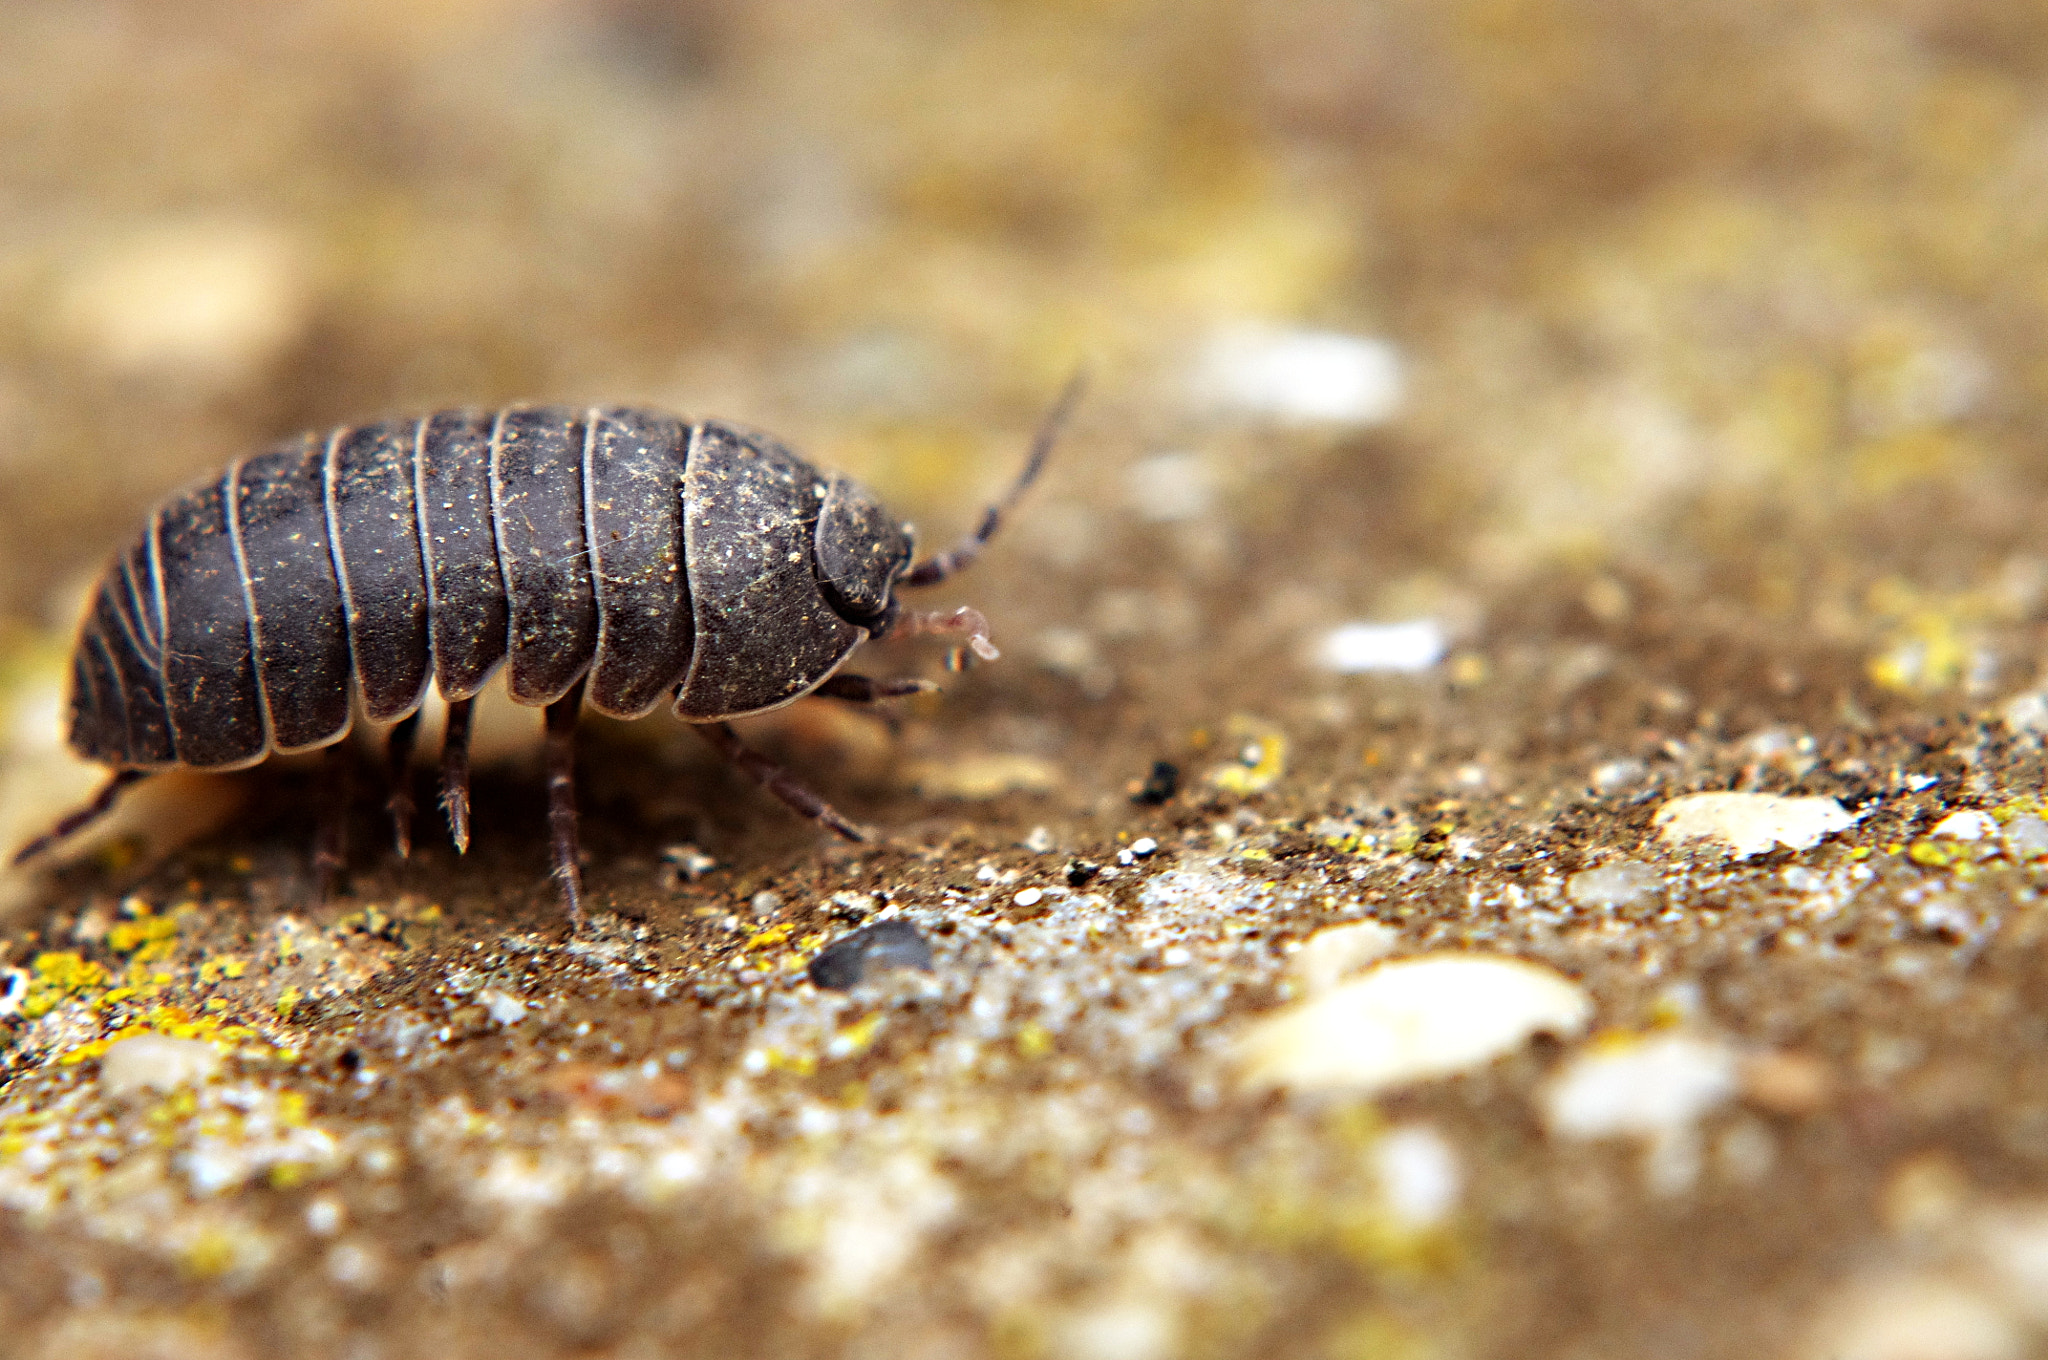 Pentax K-r + Sigma sample photo. Terrestrial isopod - oniscus asellus photography